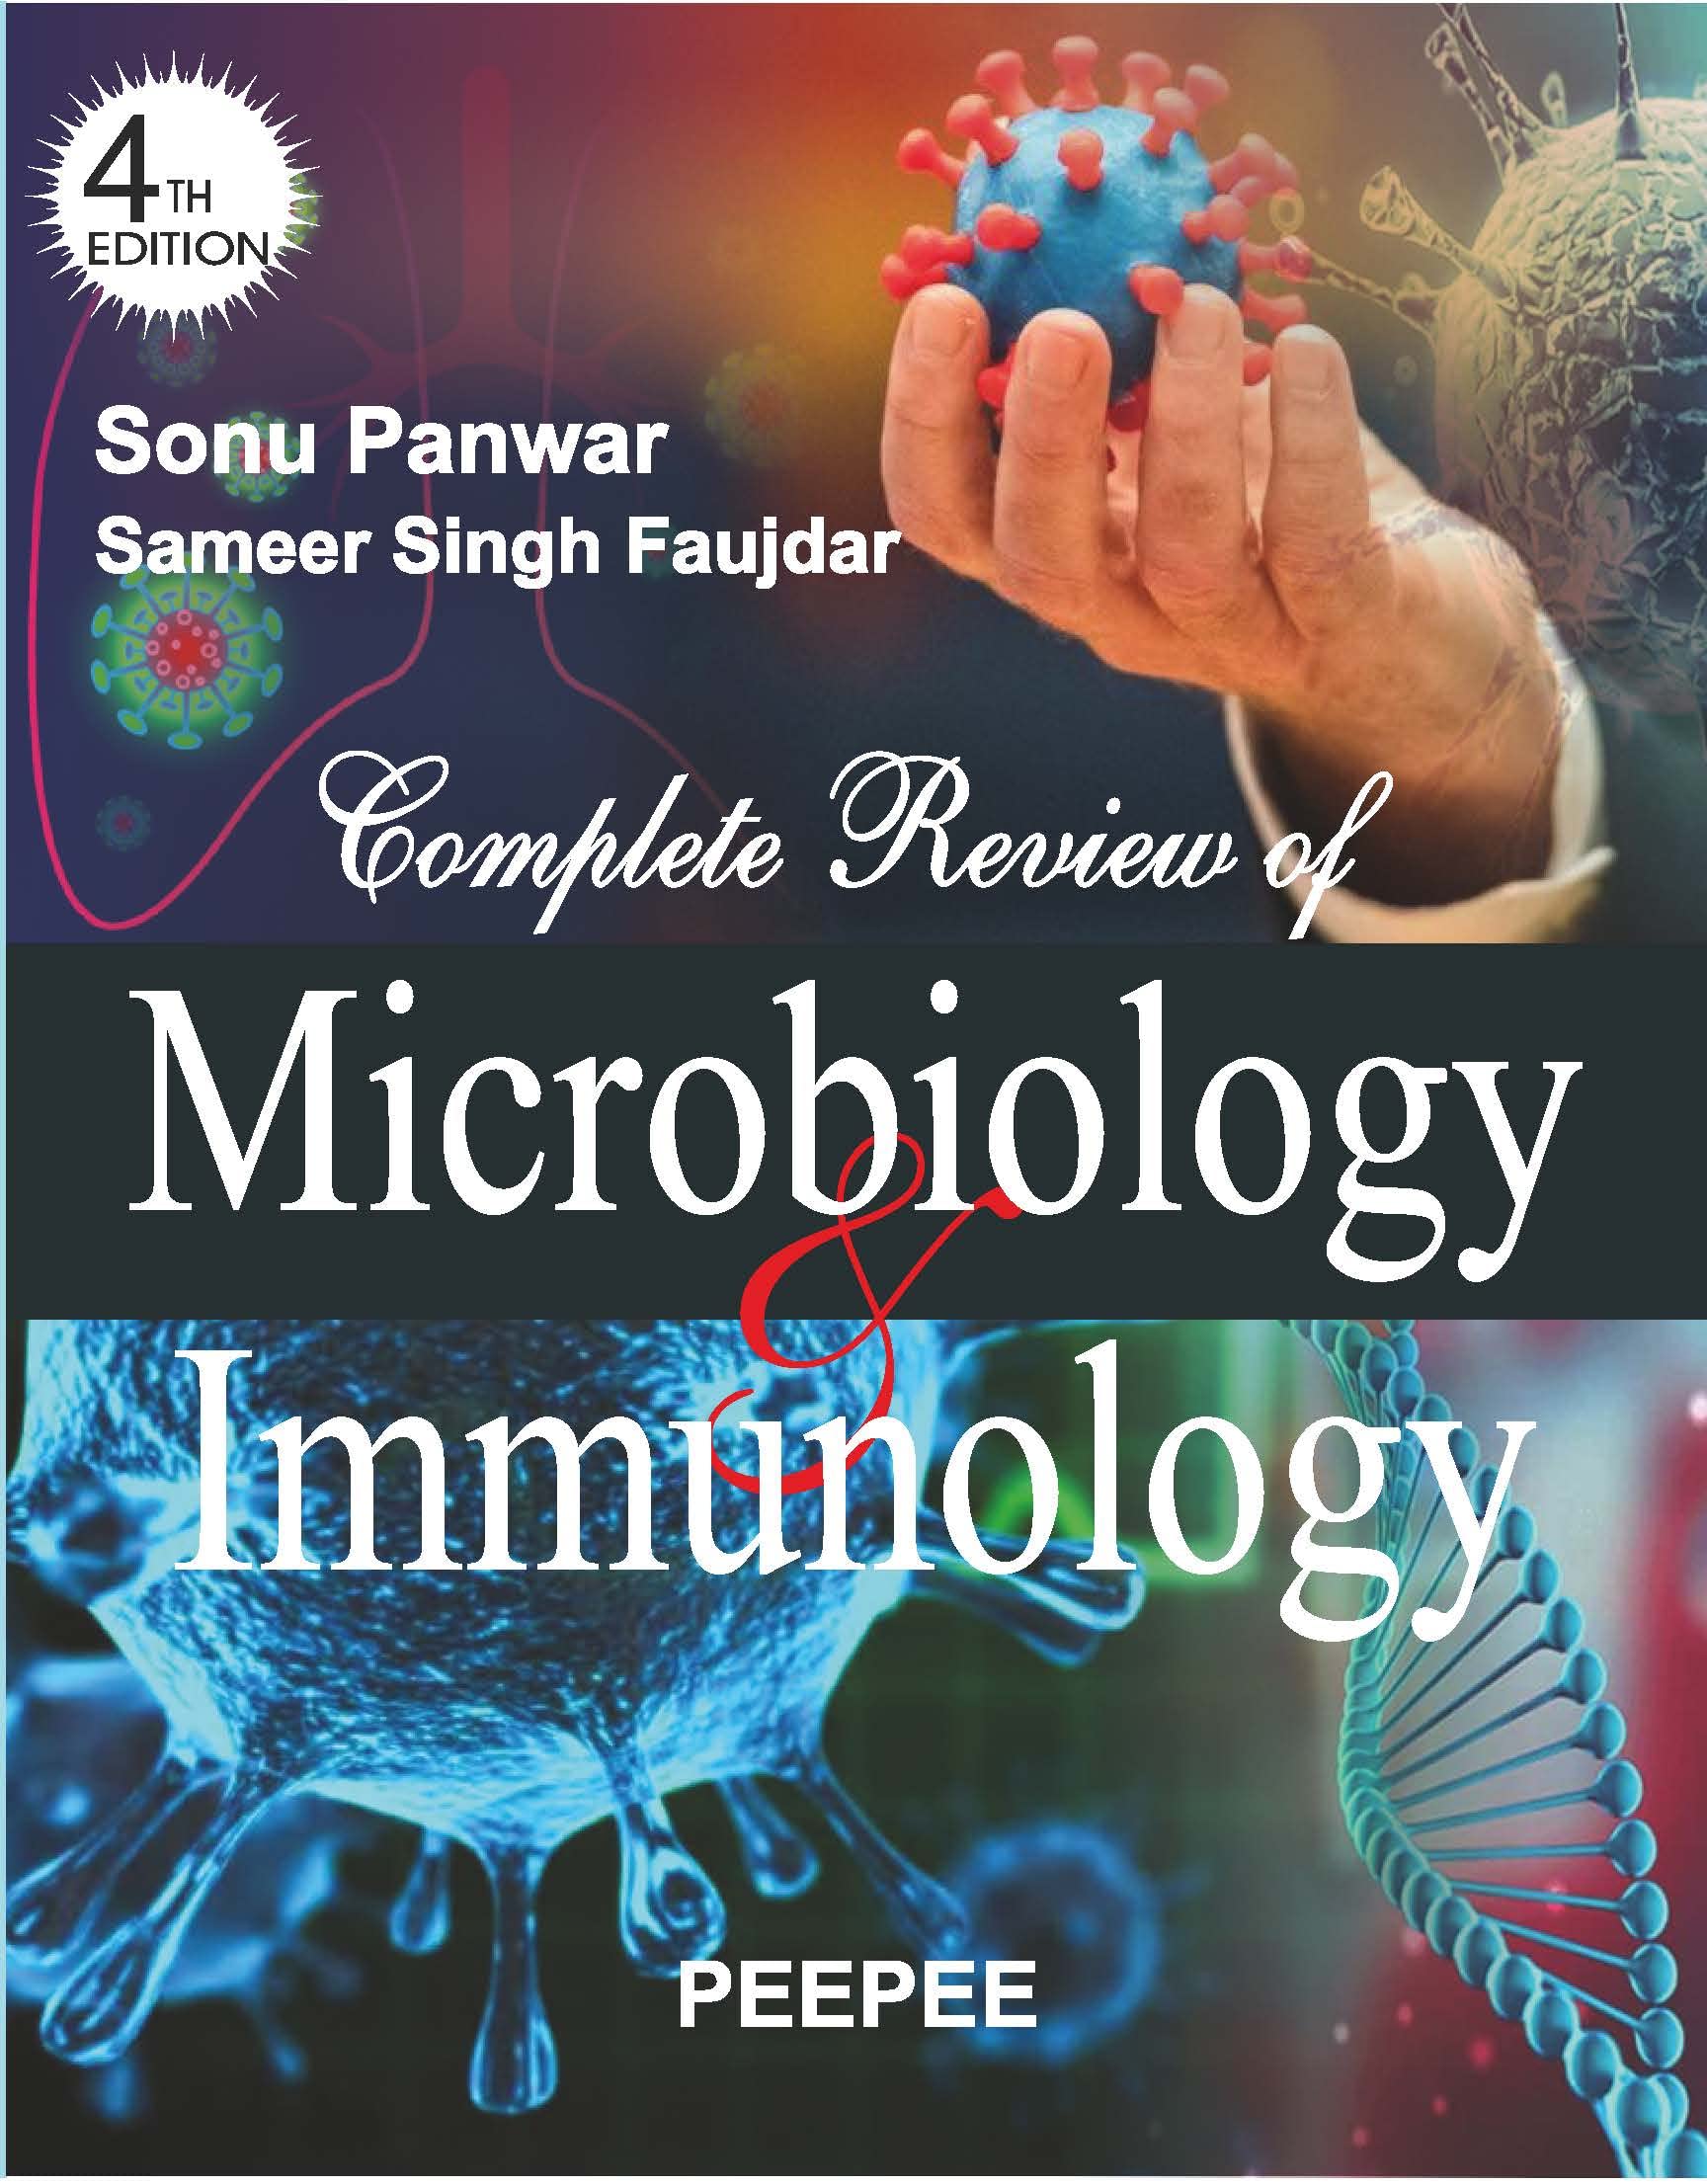 Complete Review of Microbiology and Immunology, 4th edition